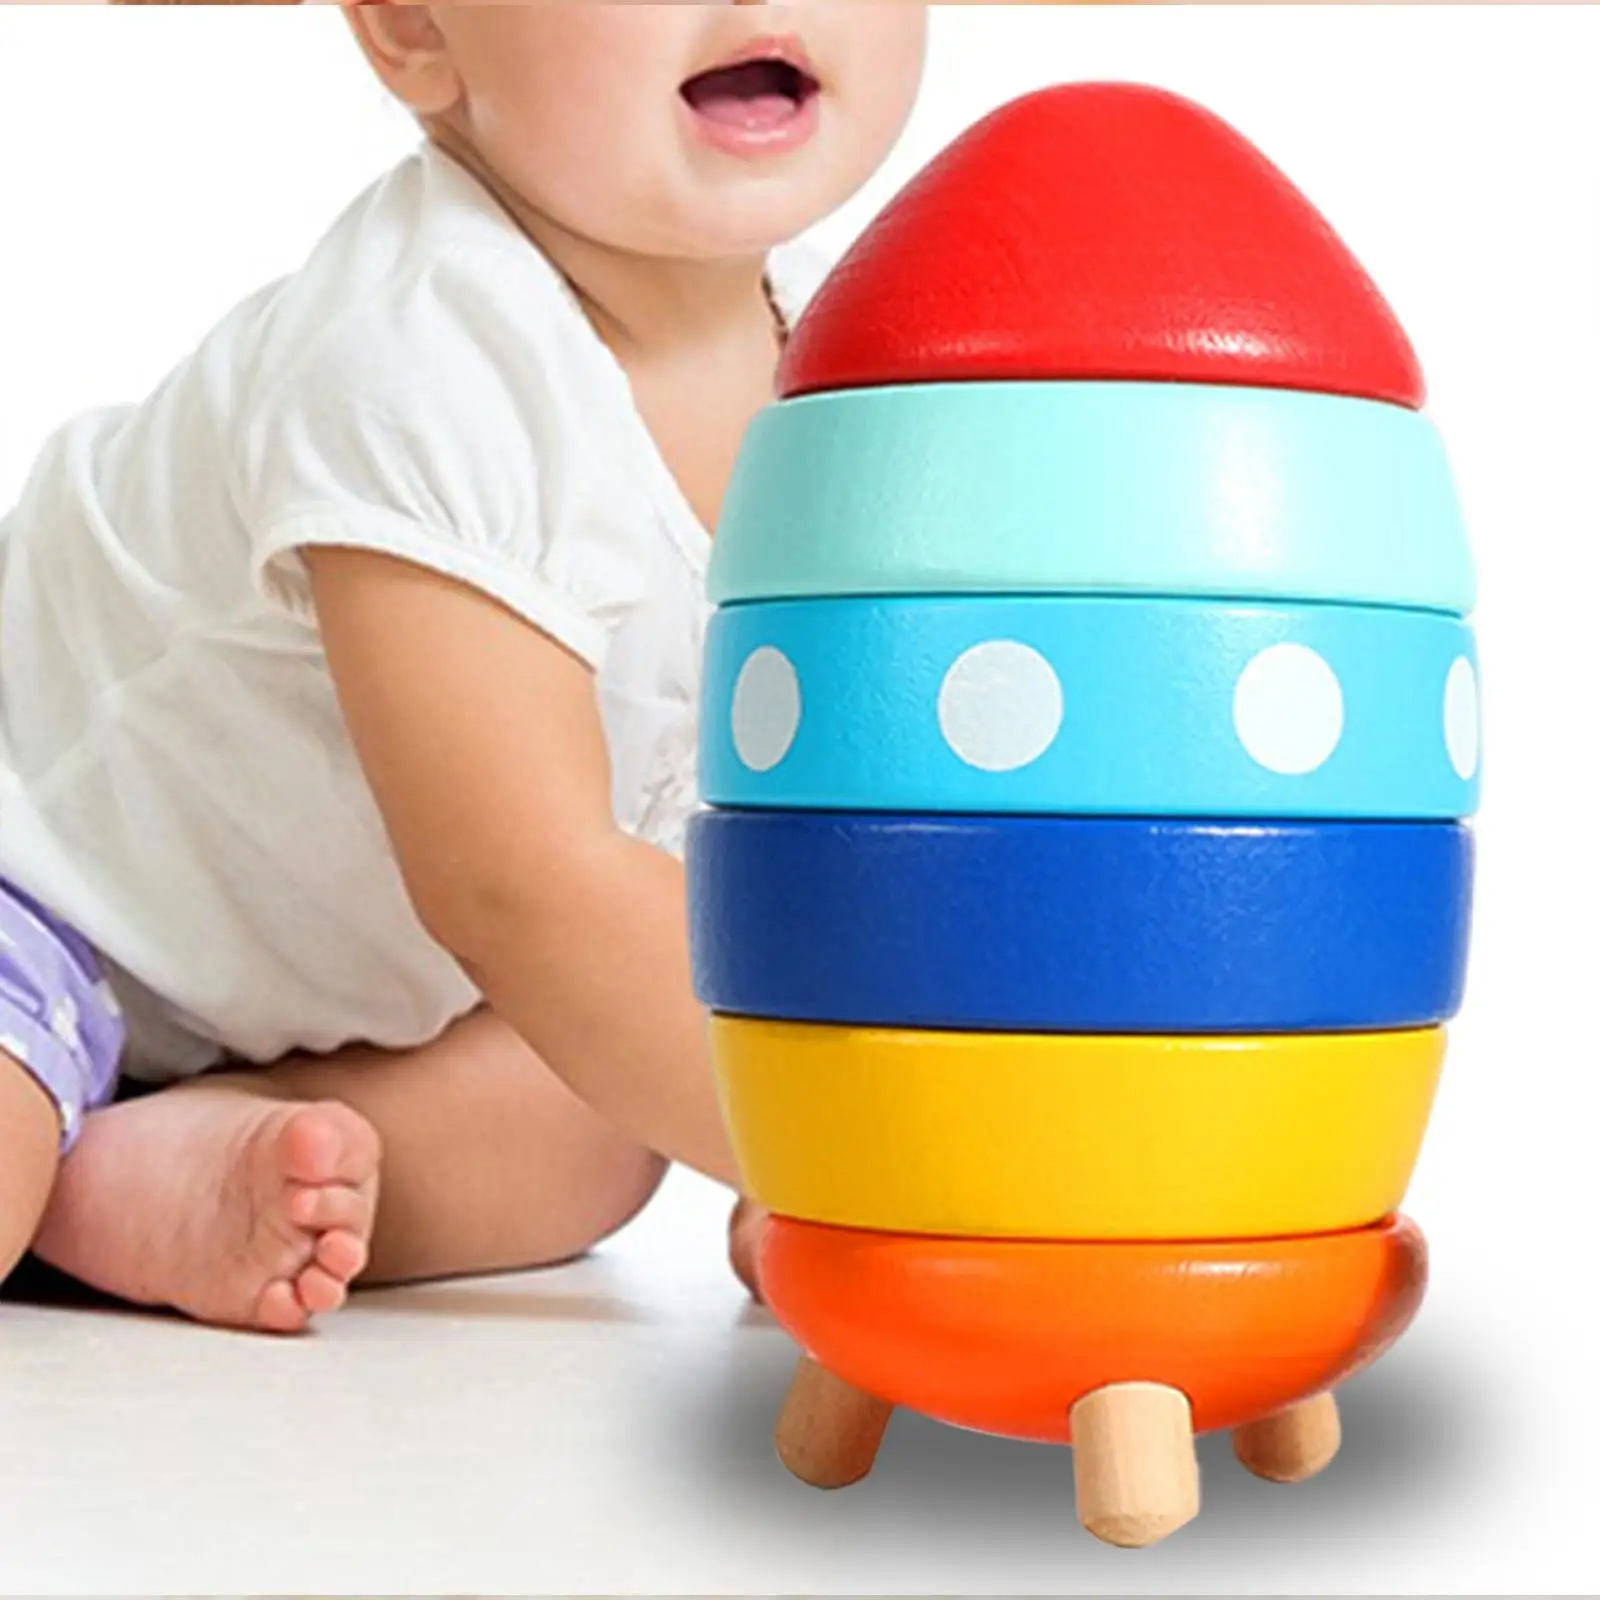 Montessori Wooden Colorful Rocket Shaped Stacking Toys Educational Toys Puzzle for Children Boys and Girls Kids